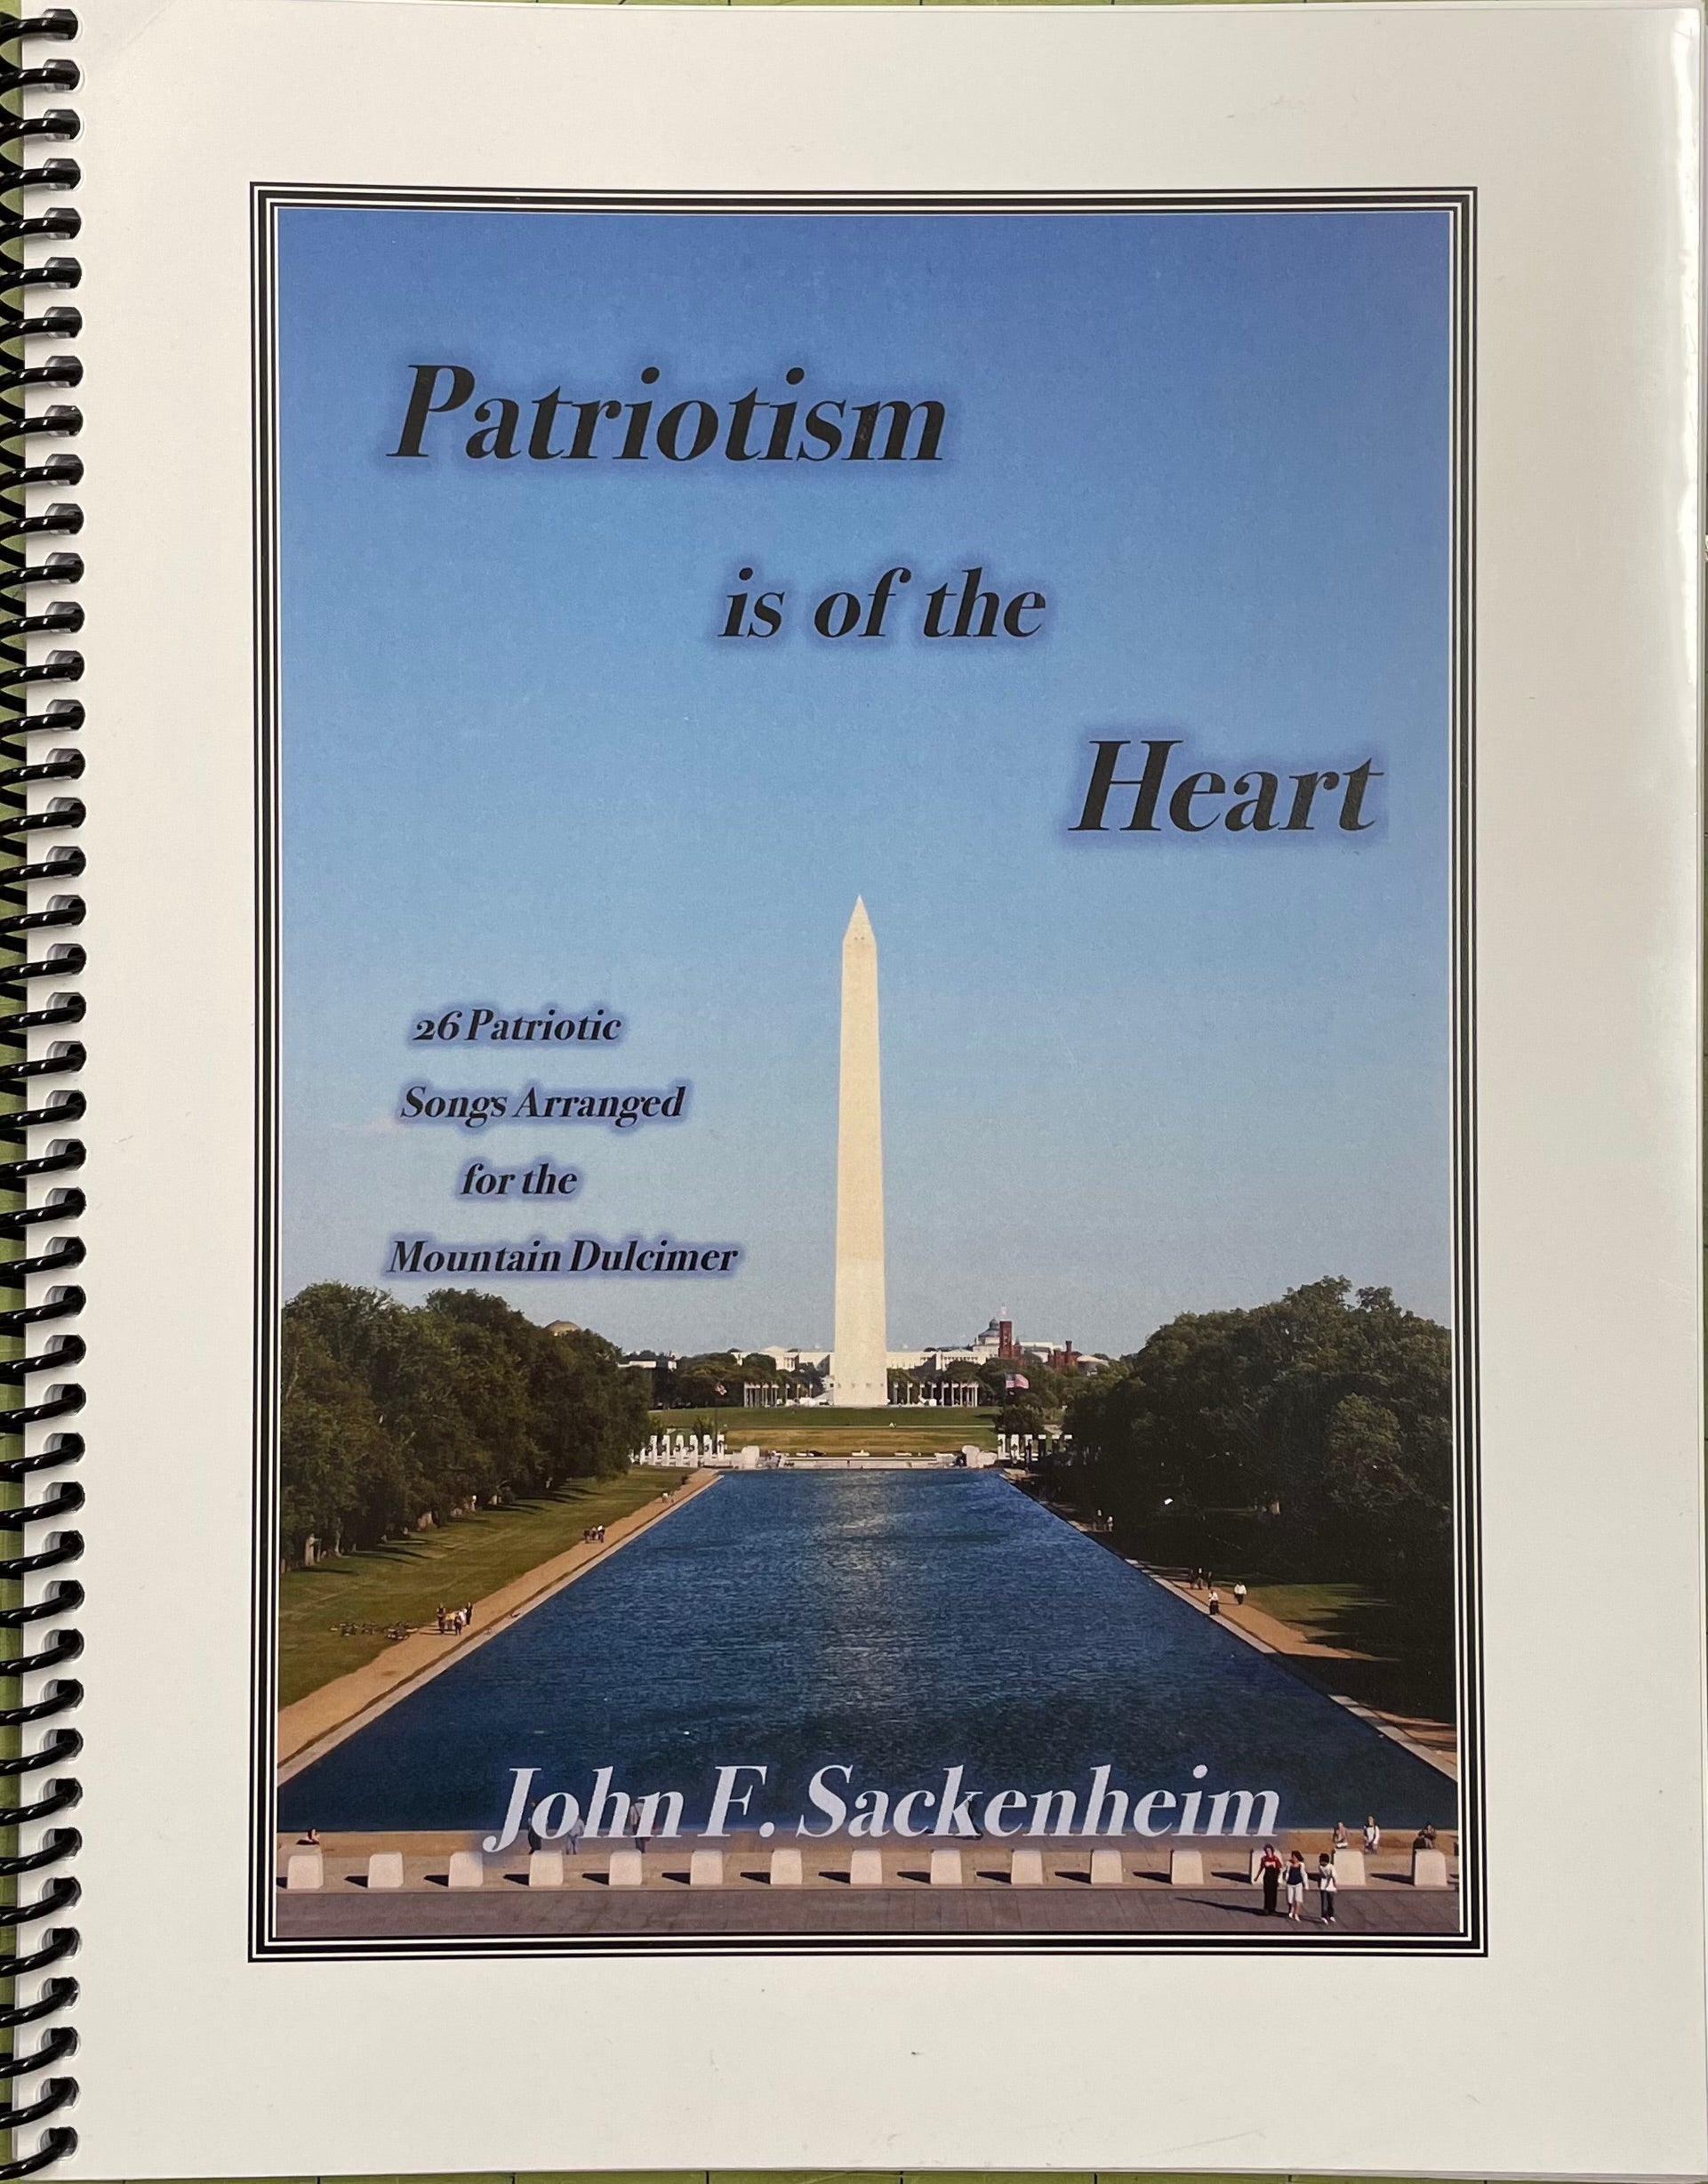 A music book titled "Patriotism is of the Heart" containing 26 patriotic tunes arranged for the mountain dulcimer in DAd tuning, authored by John Sackenheim.